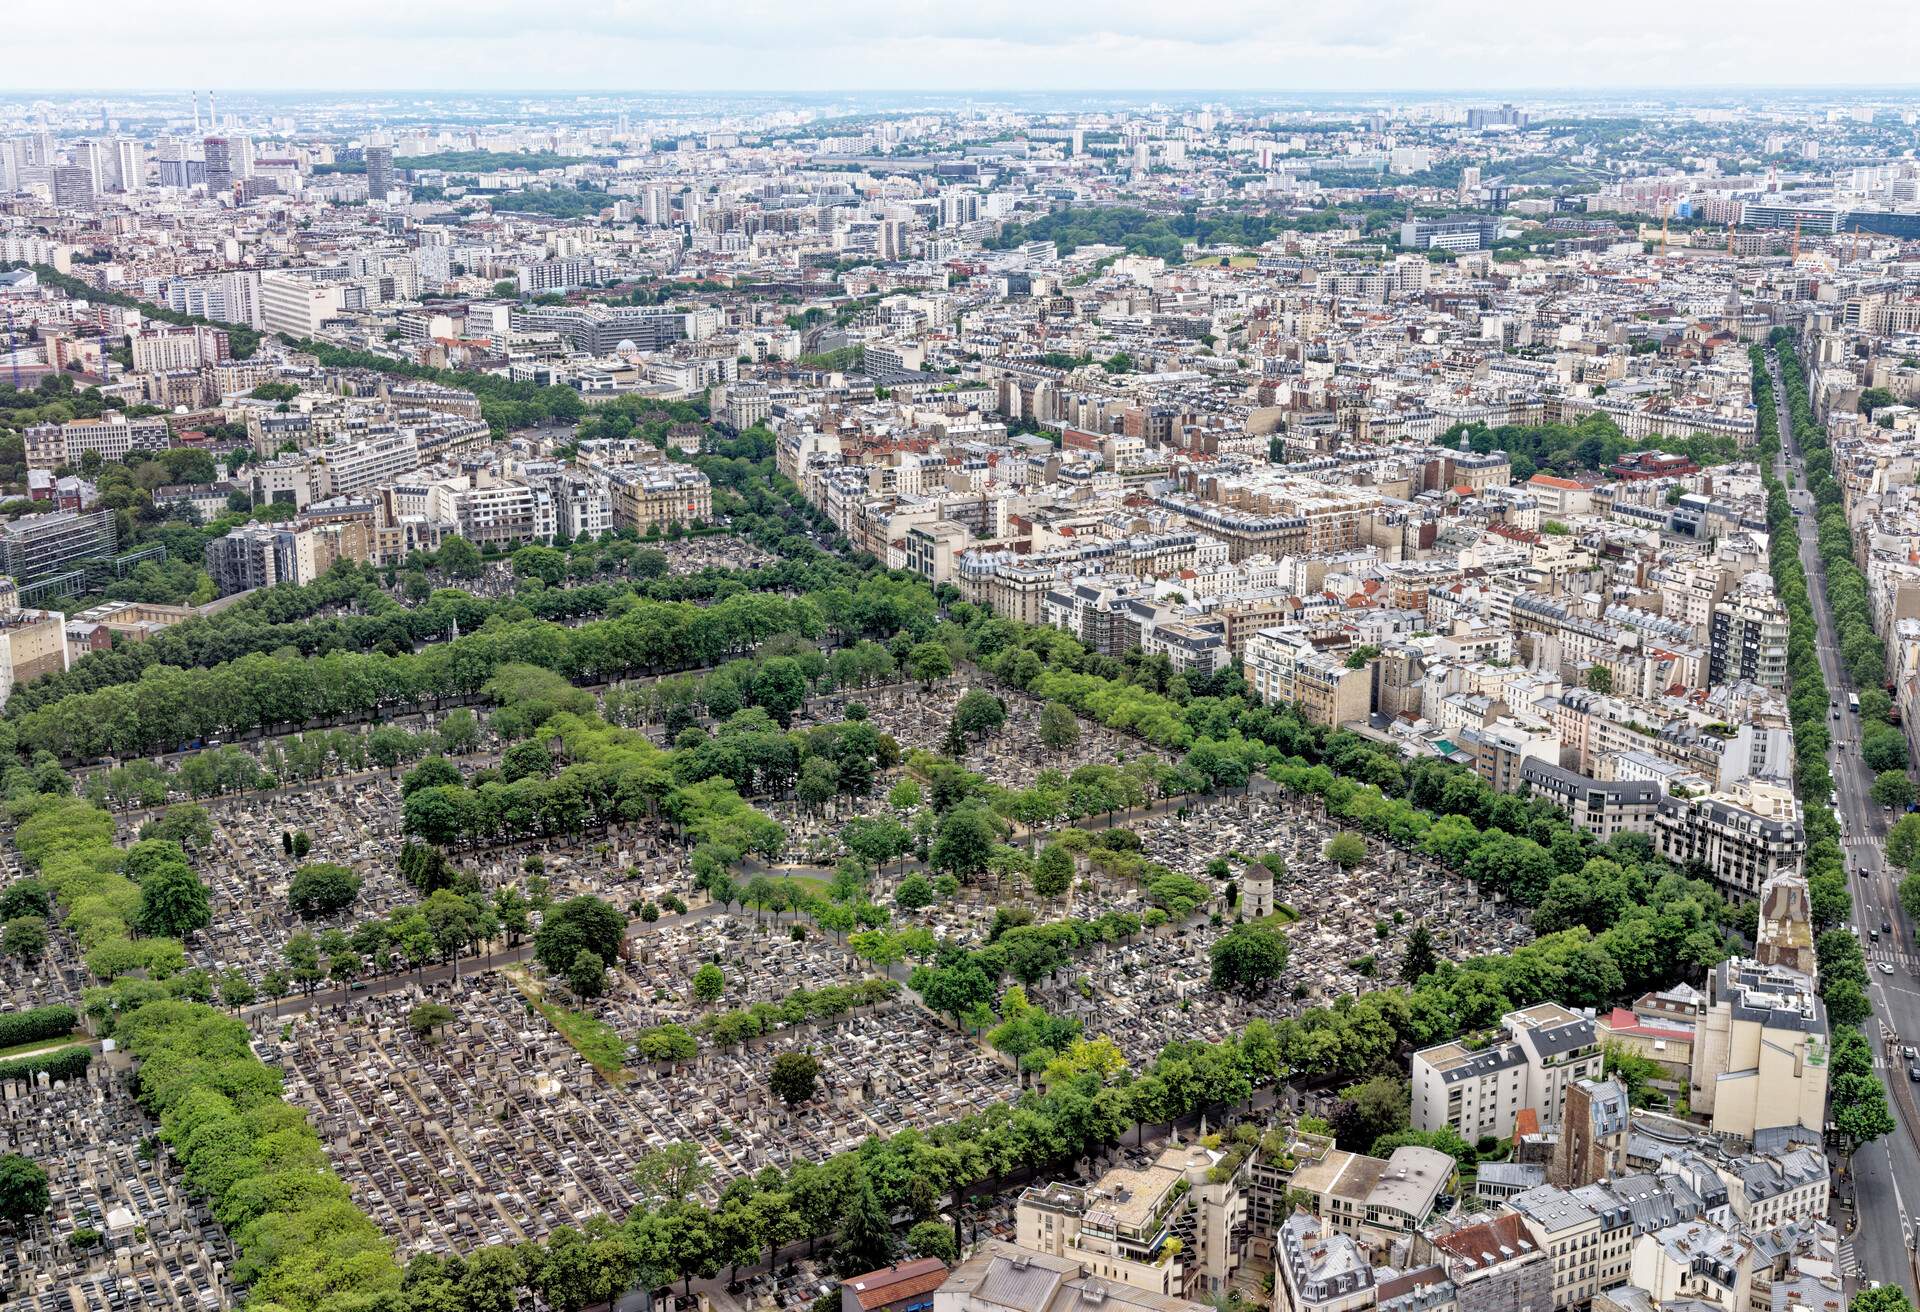 View over Pere - Lachaise Cemetery Paris from the observation deck at the top of the Tour Montparnasse, Paris, France. 11th of June 2016